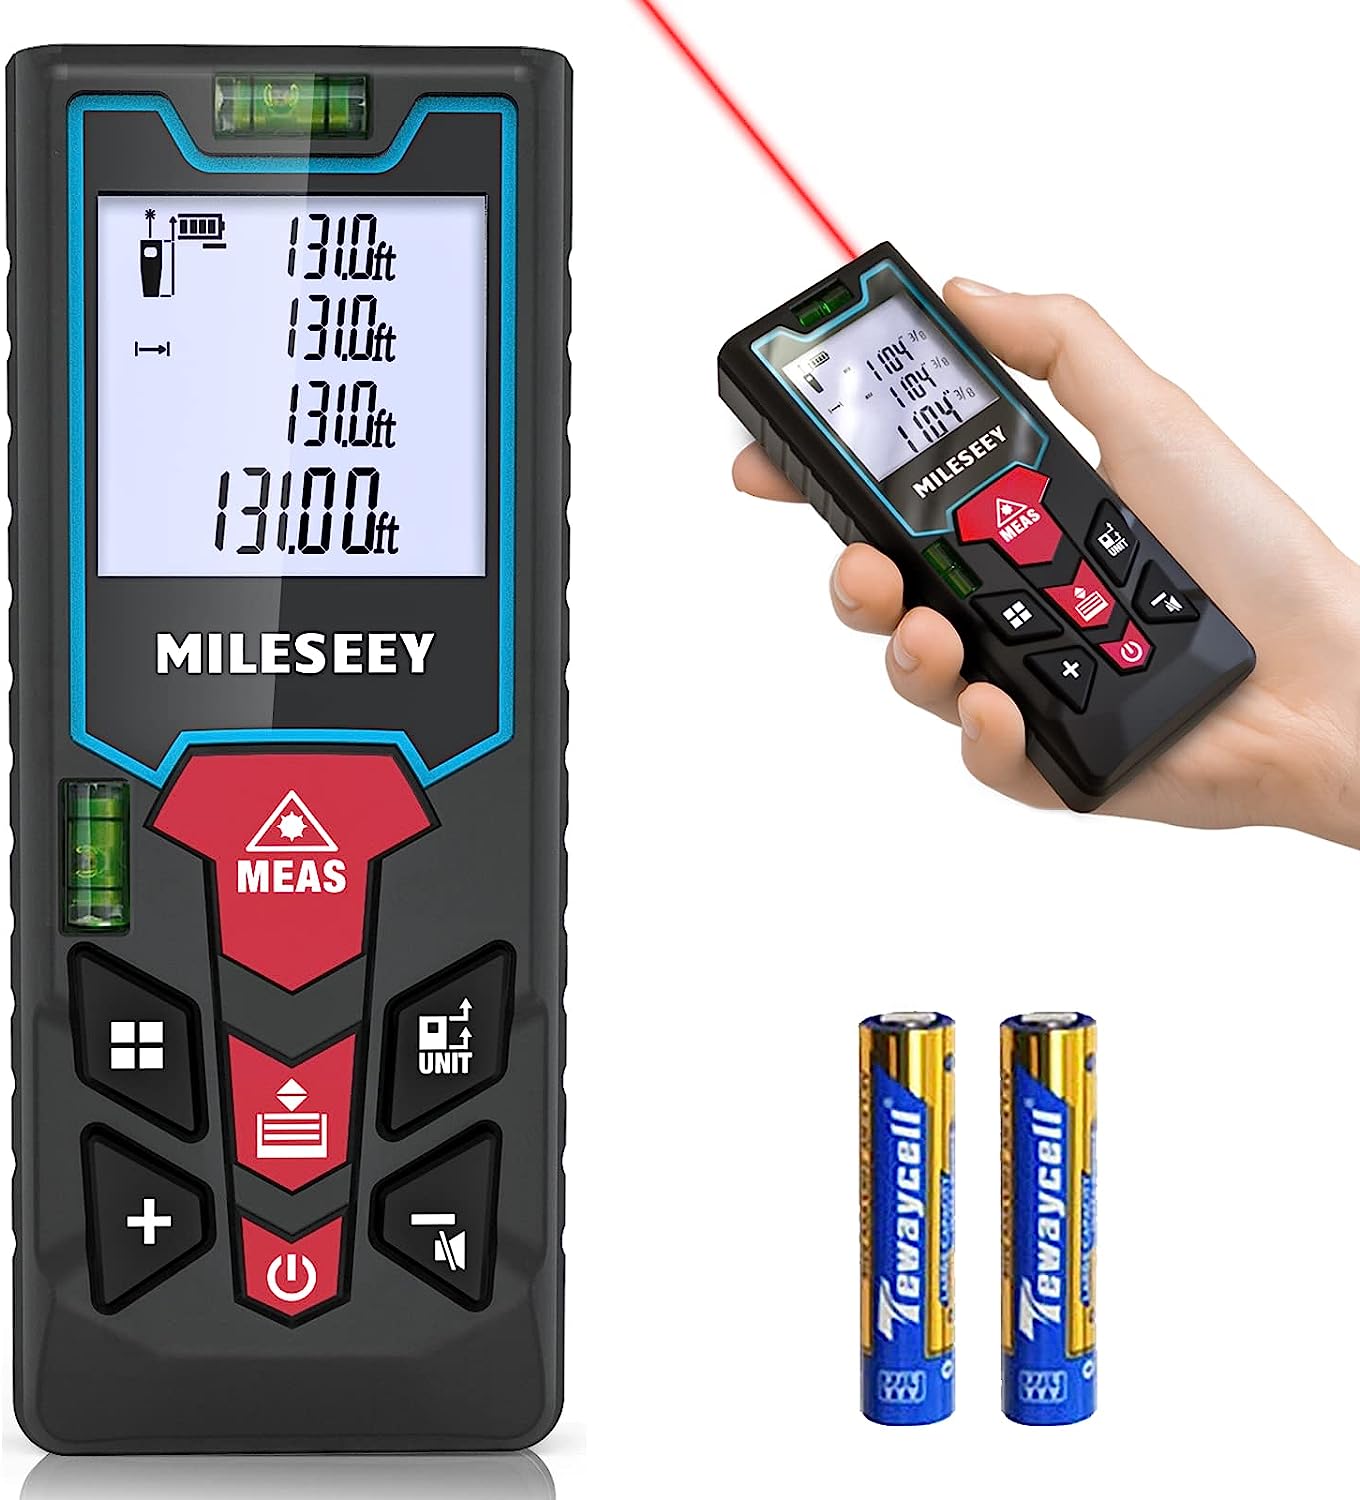 Laser Measure 130ft, MiLESEEY Laser Tape Measure with [...]